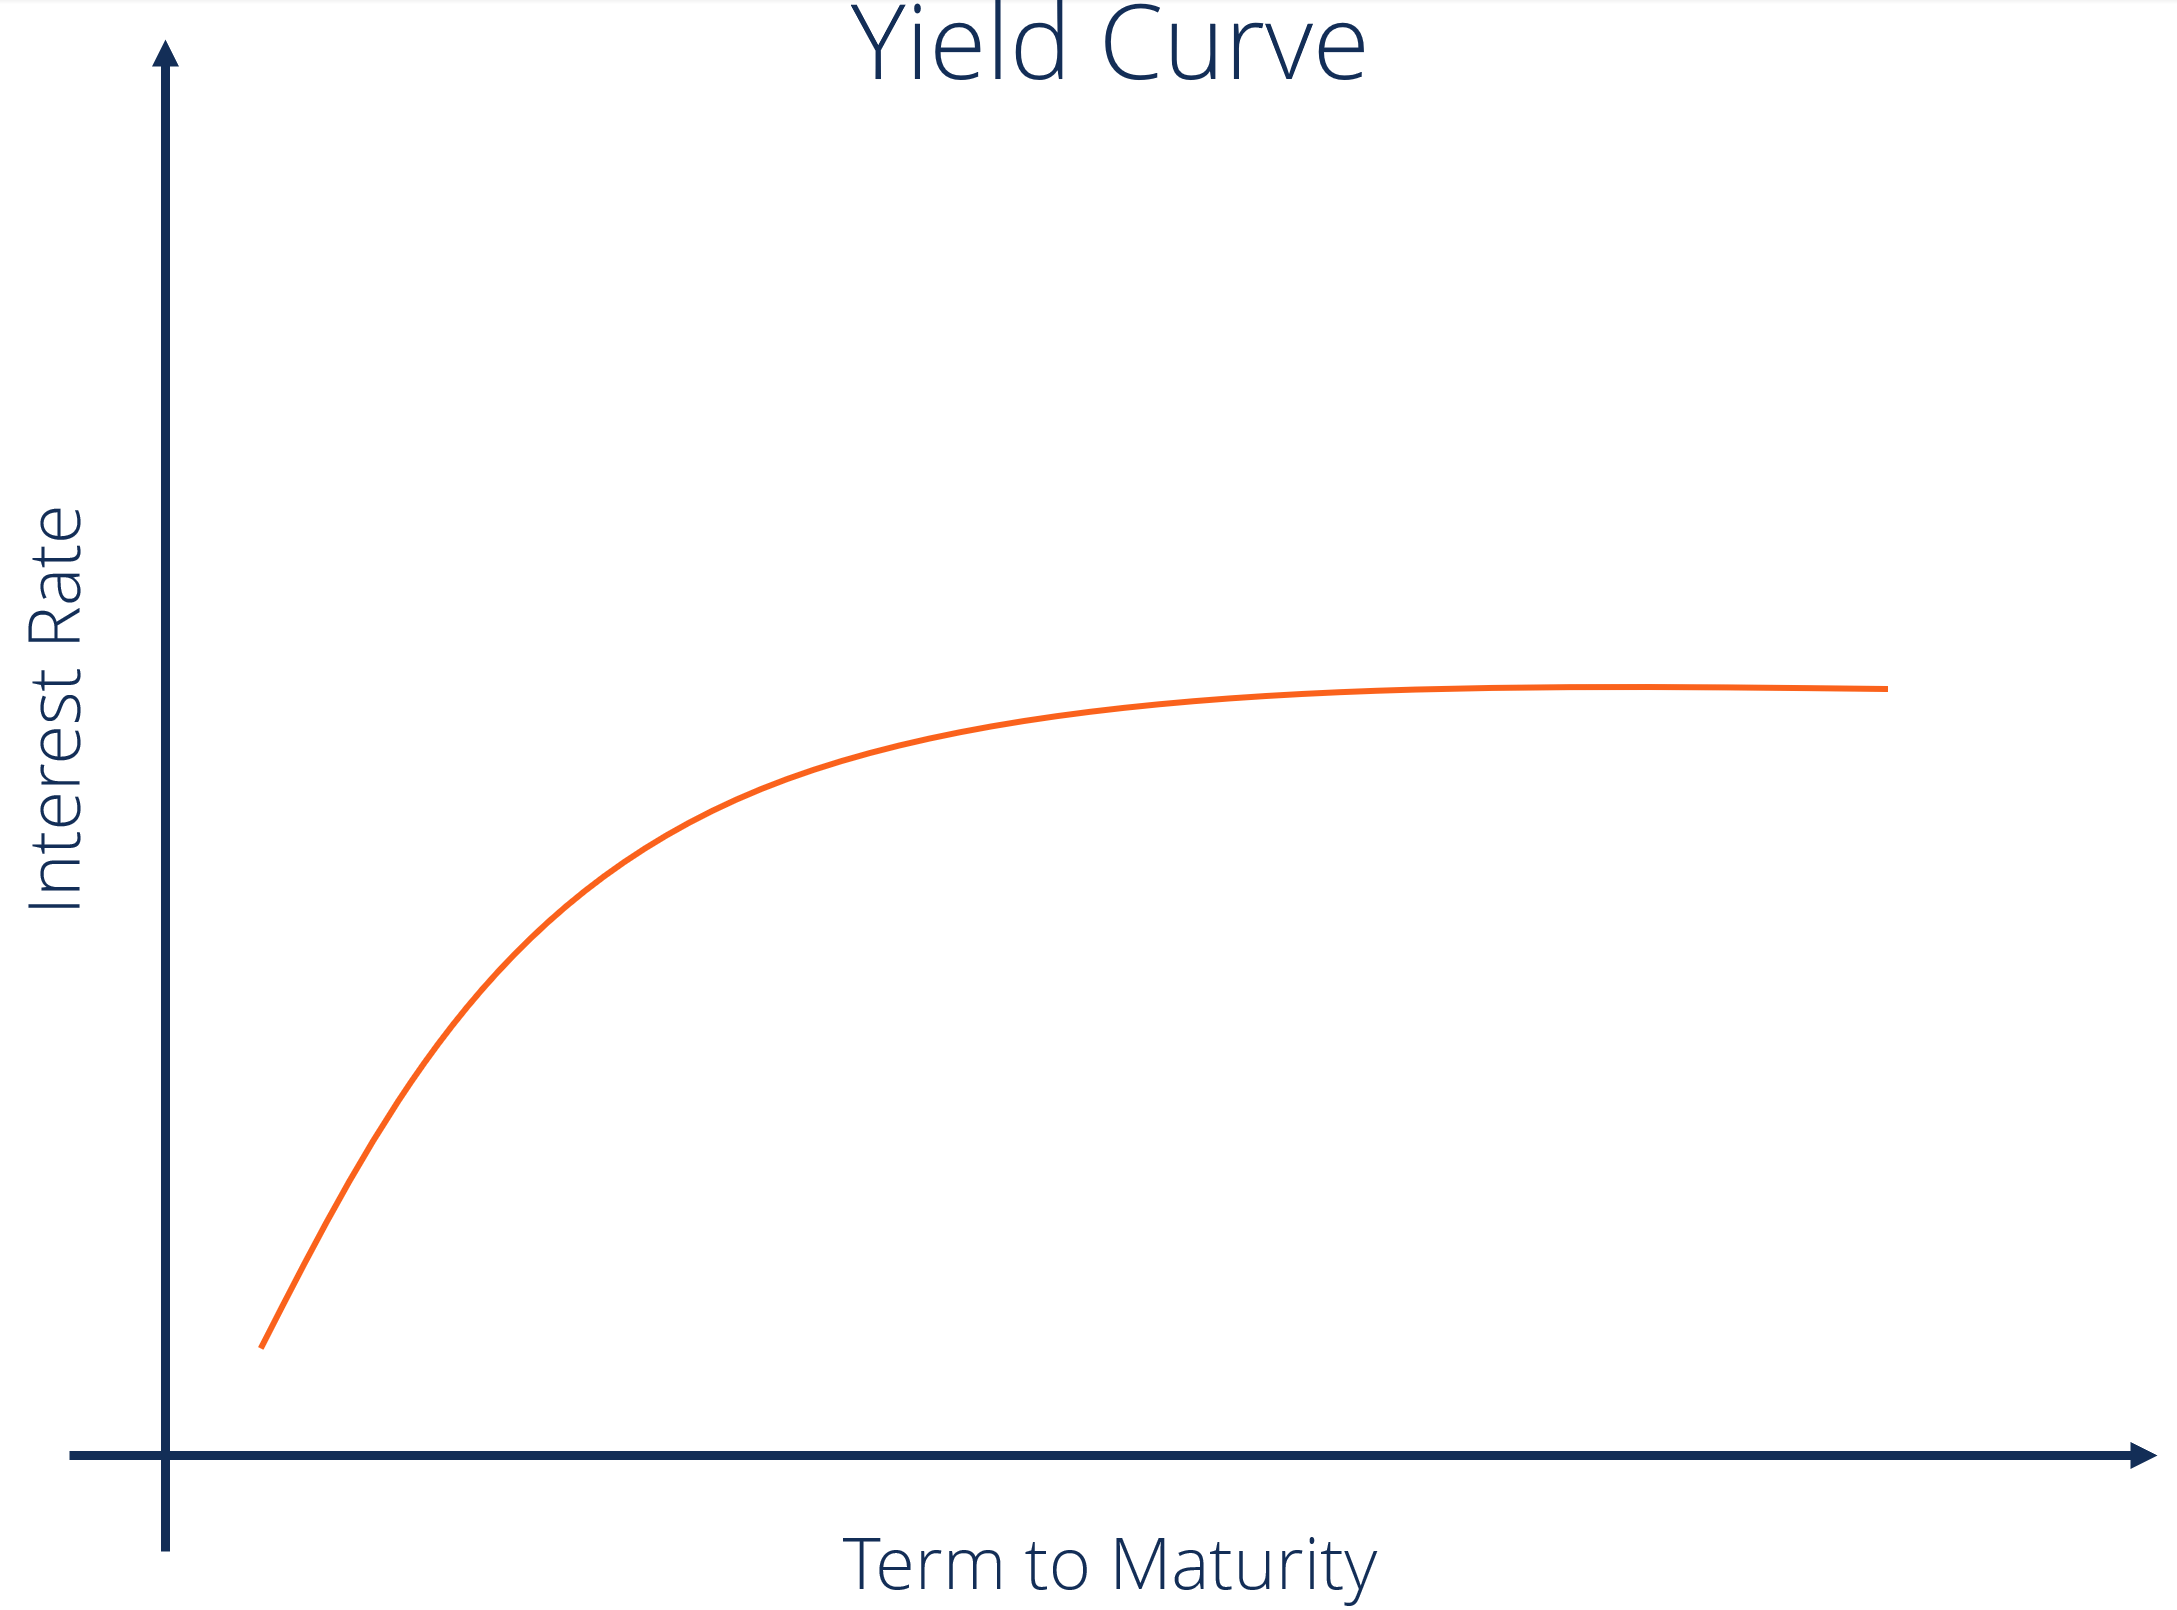 The Yield Curve: What You've Always Wanted to Know but Were Afraid